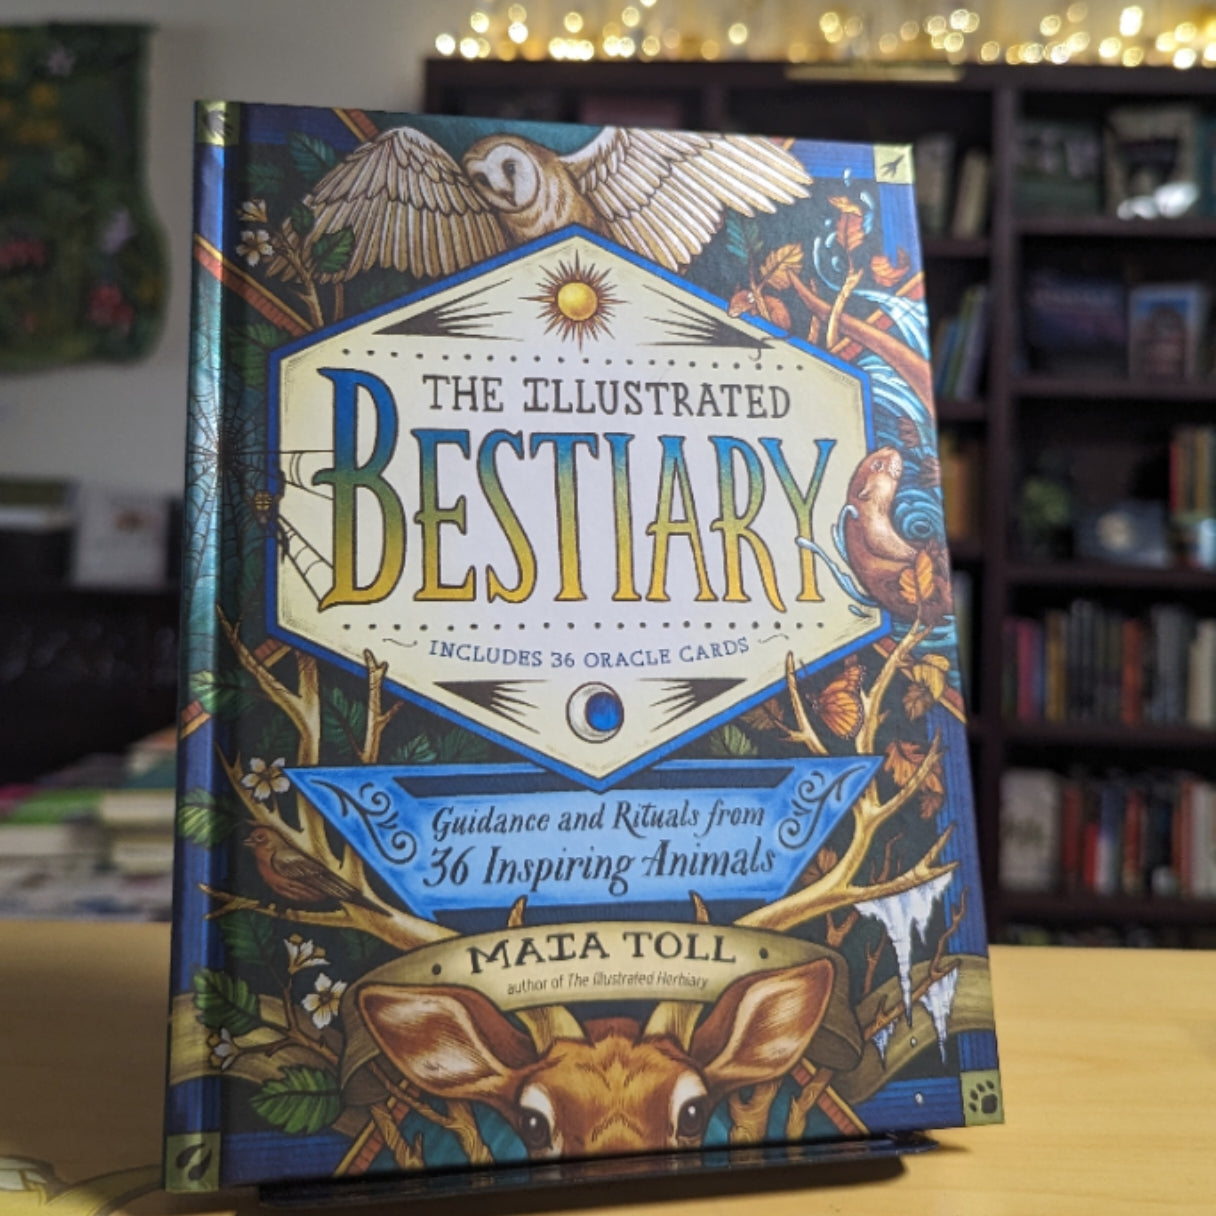 The Illustrated Bestiary: Guidance and Rituals from 36 Inspiring Animals (Wild Wisdom)